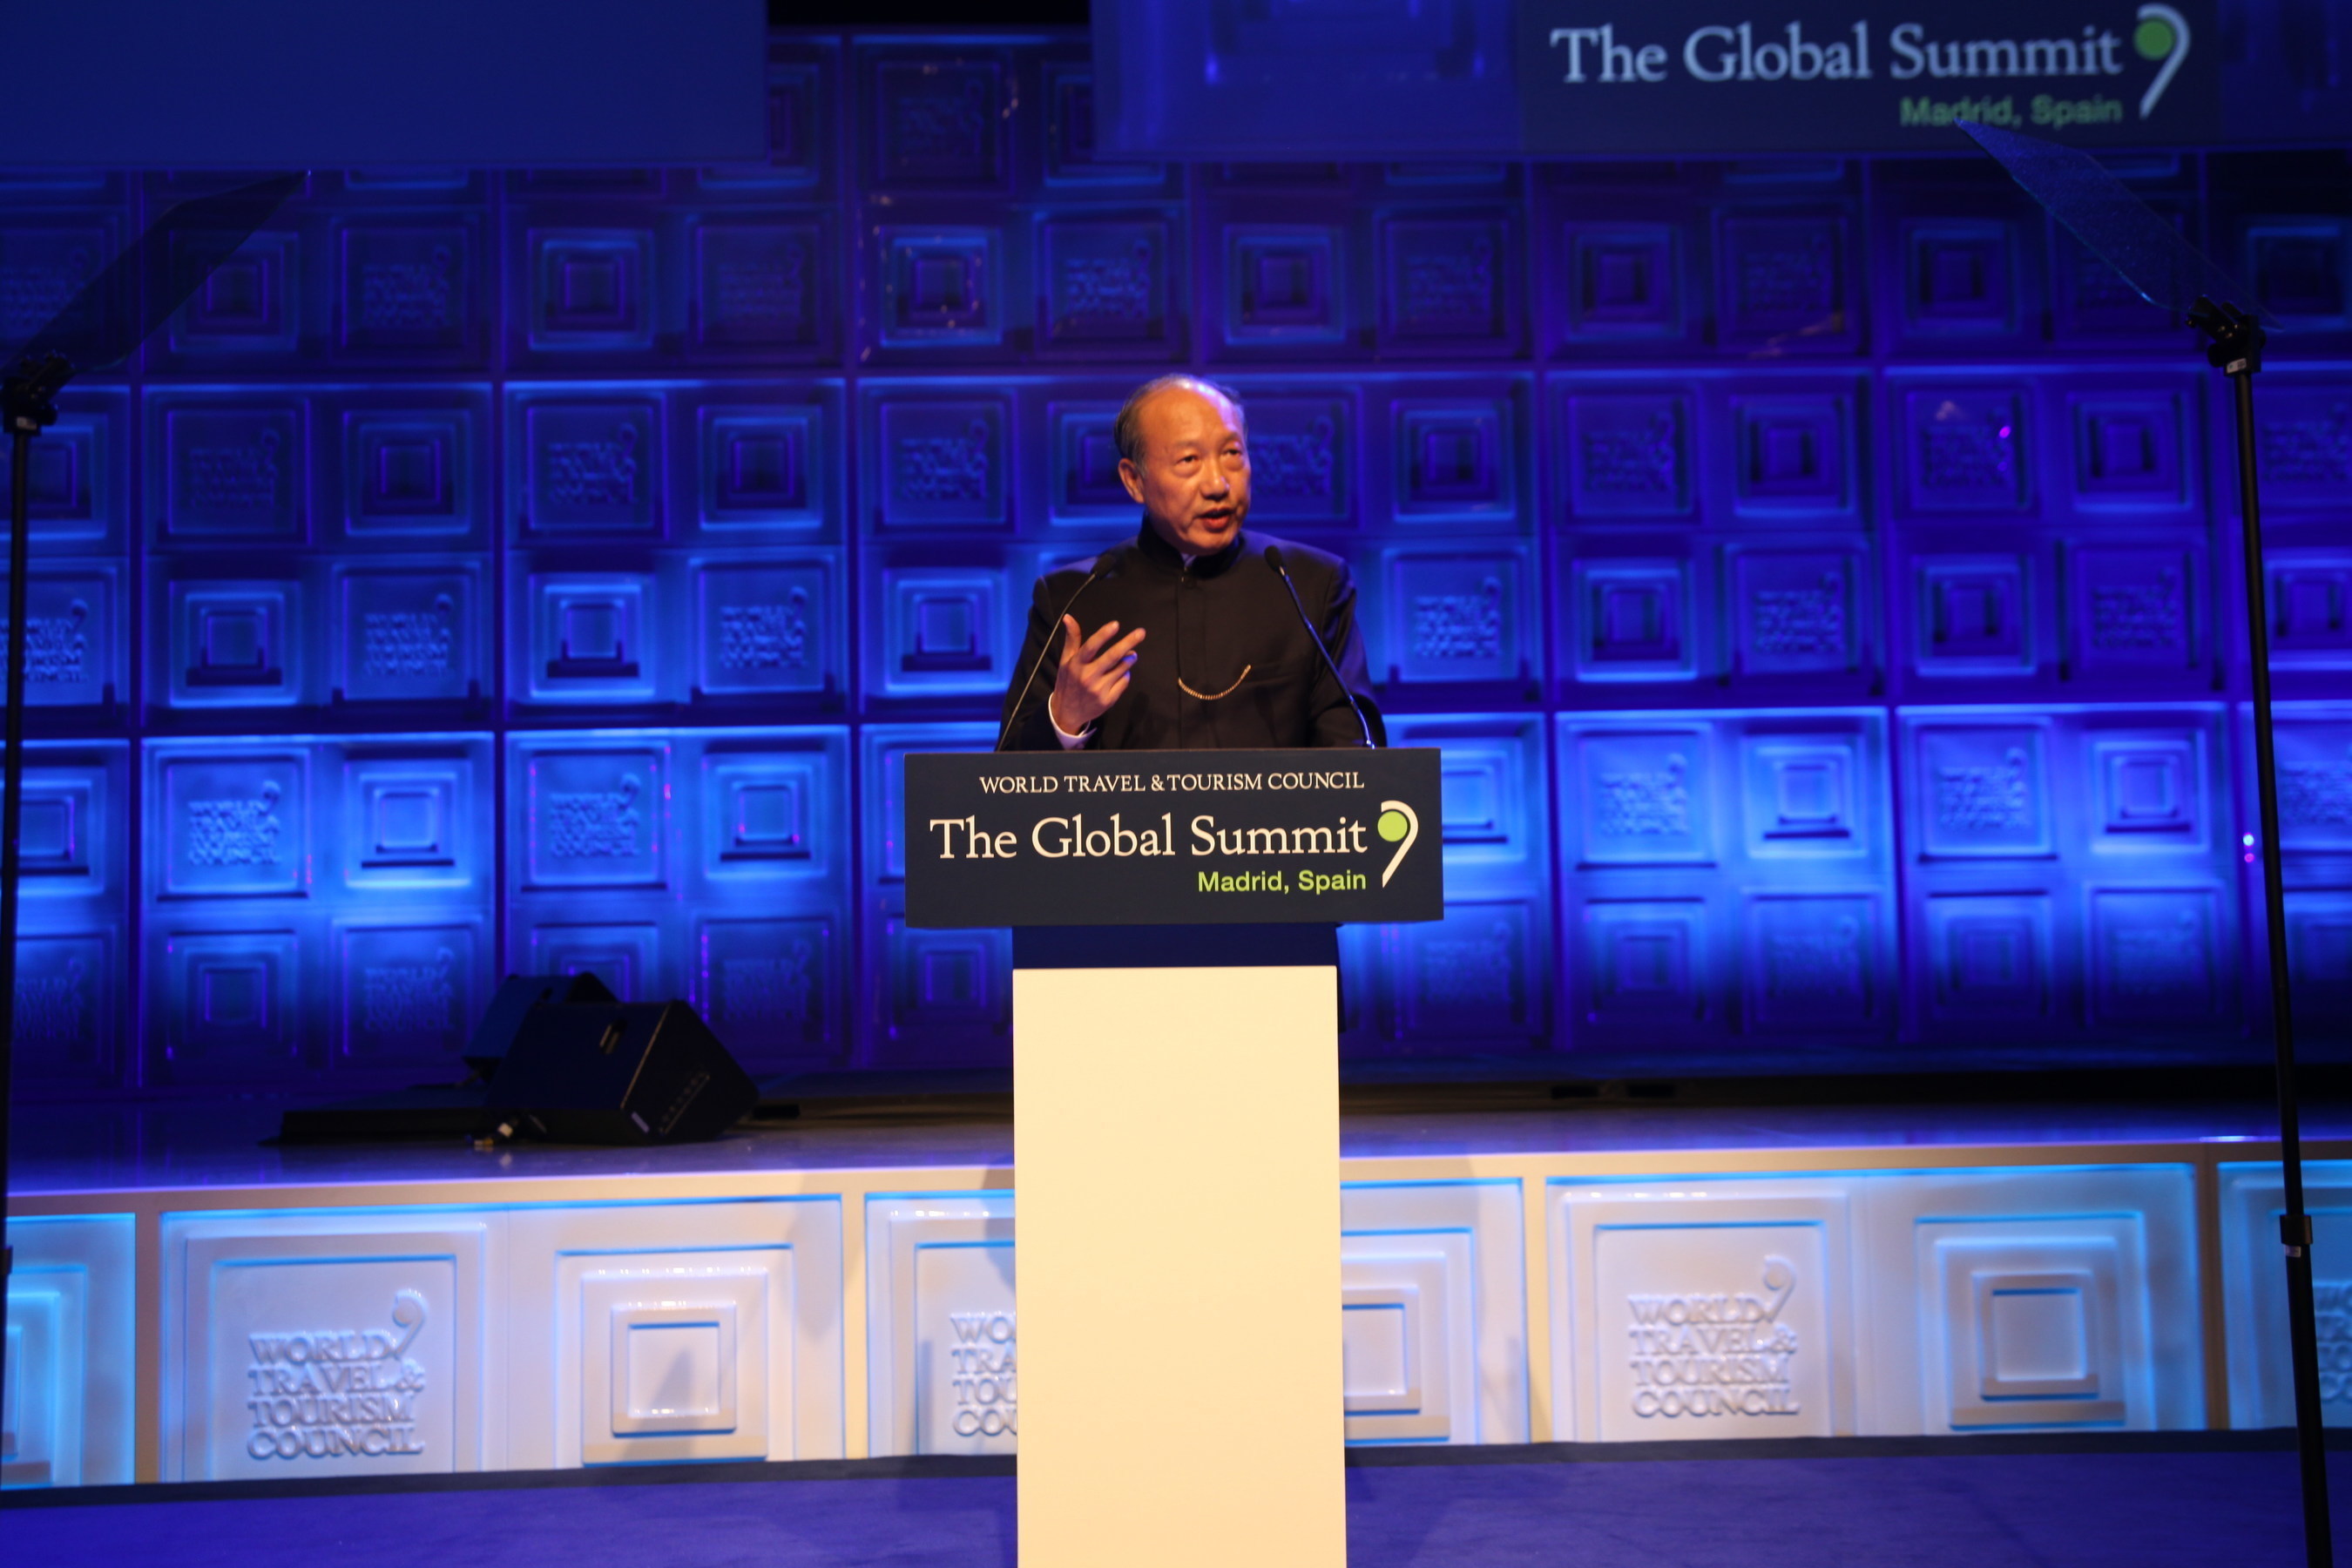 HNA Group chairman Chen Feng gives a speech at the 2015 World Travel & Tourism Council (WTTC) Global Summit